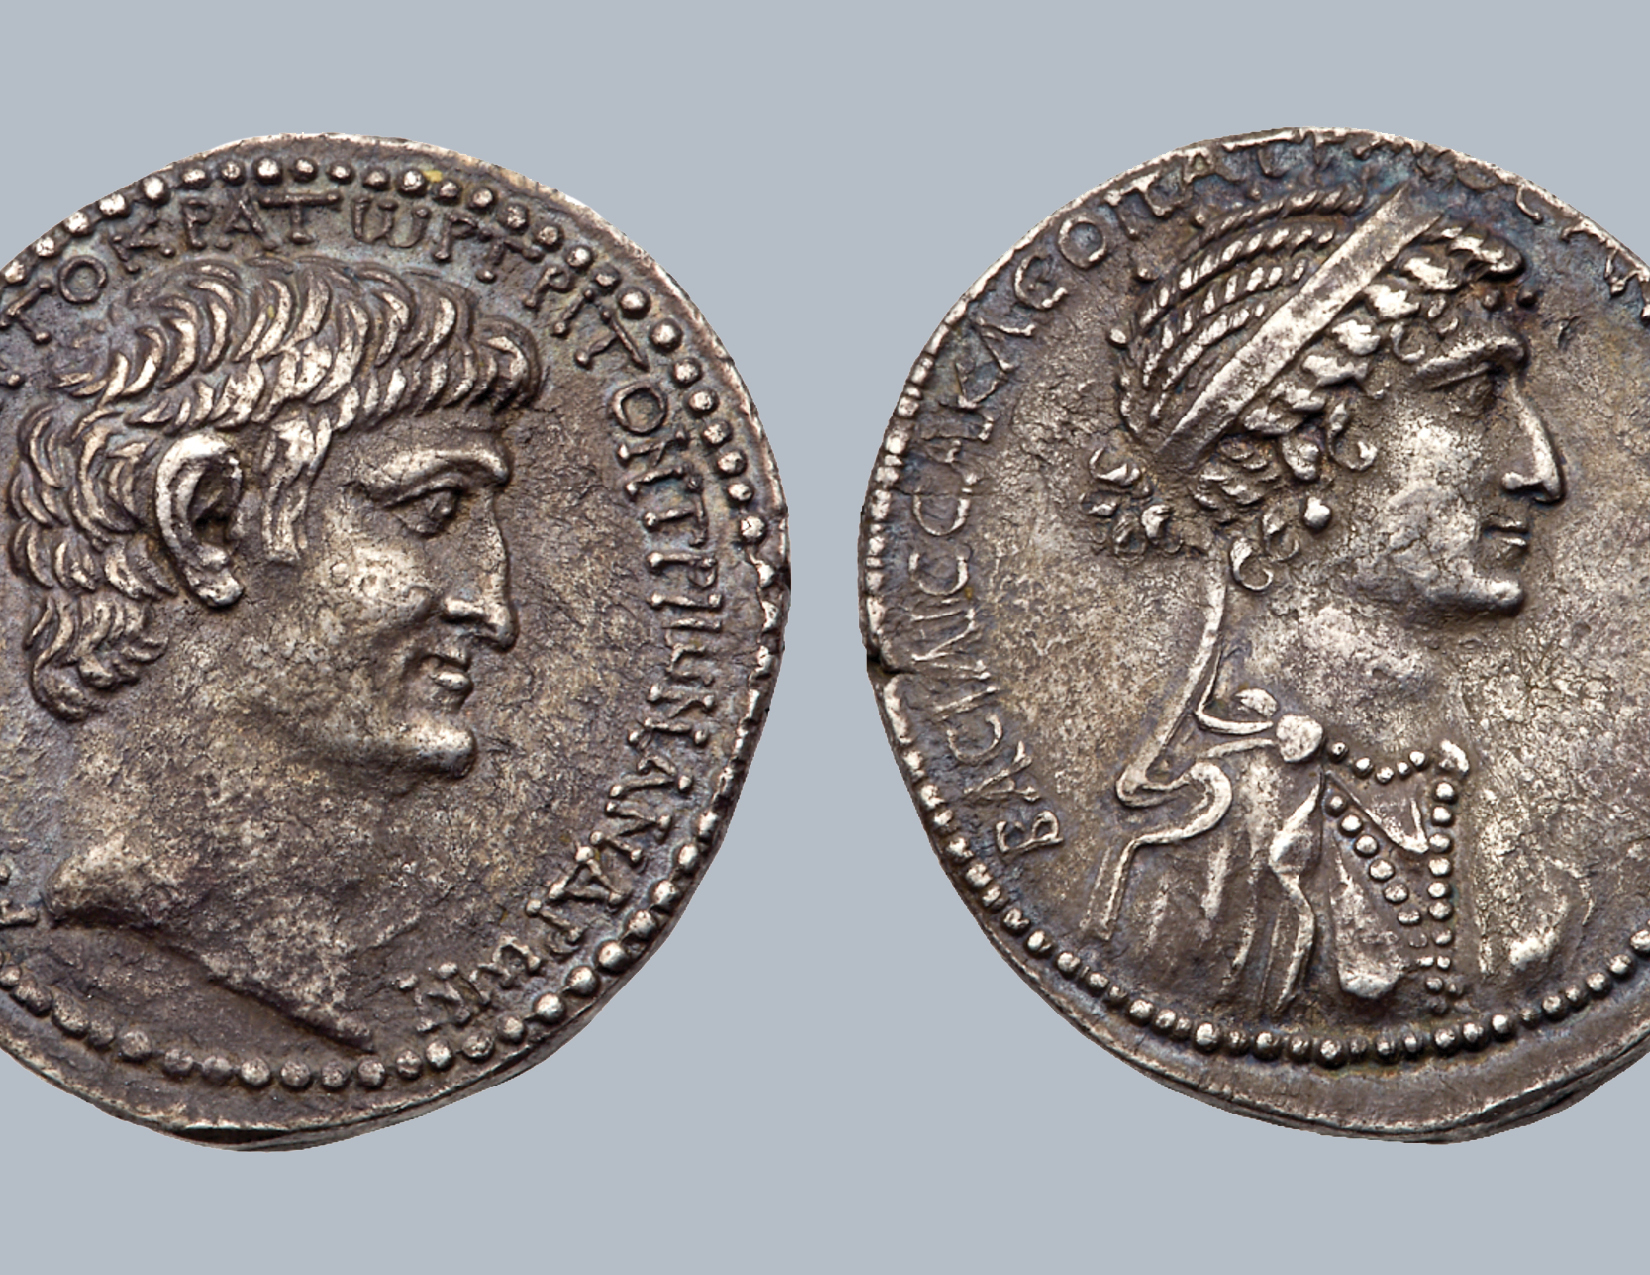 Antony and Cleopatra: a Match Made on Coinage—Lucia Carbone